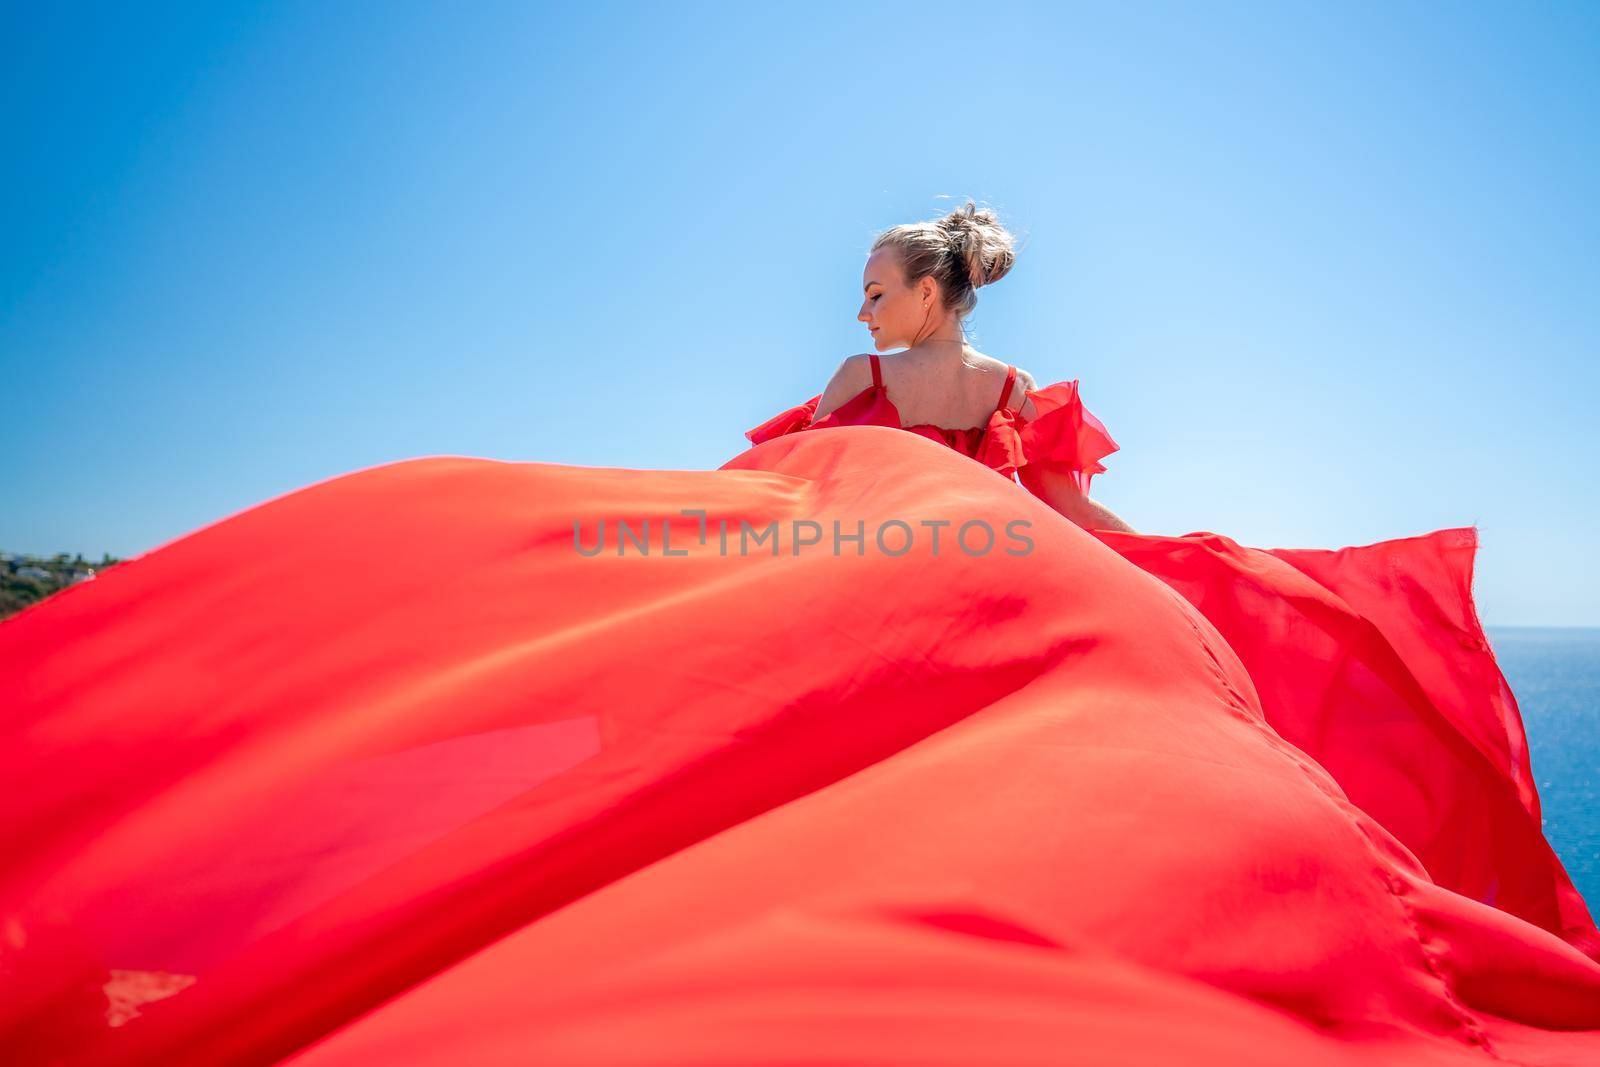 Blonde with long hair on a sunny seashore in a red flowing dress, back view, silk fabric waving in the wind. Against the backdrop of the blue sky and mountains on the seashore. by Matiunina